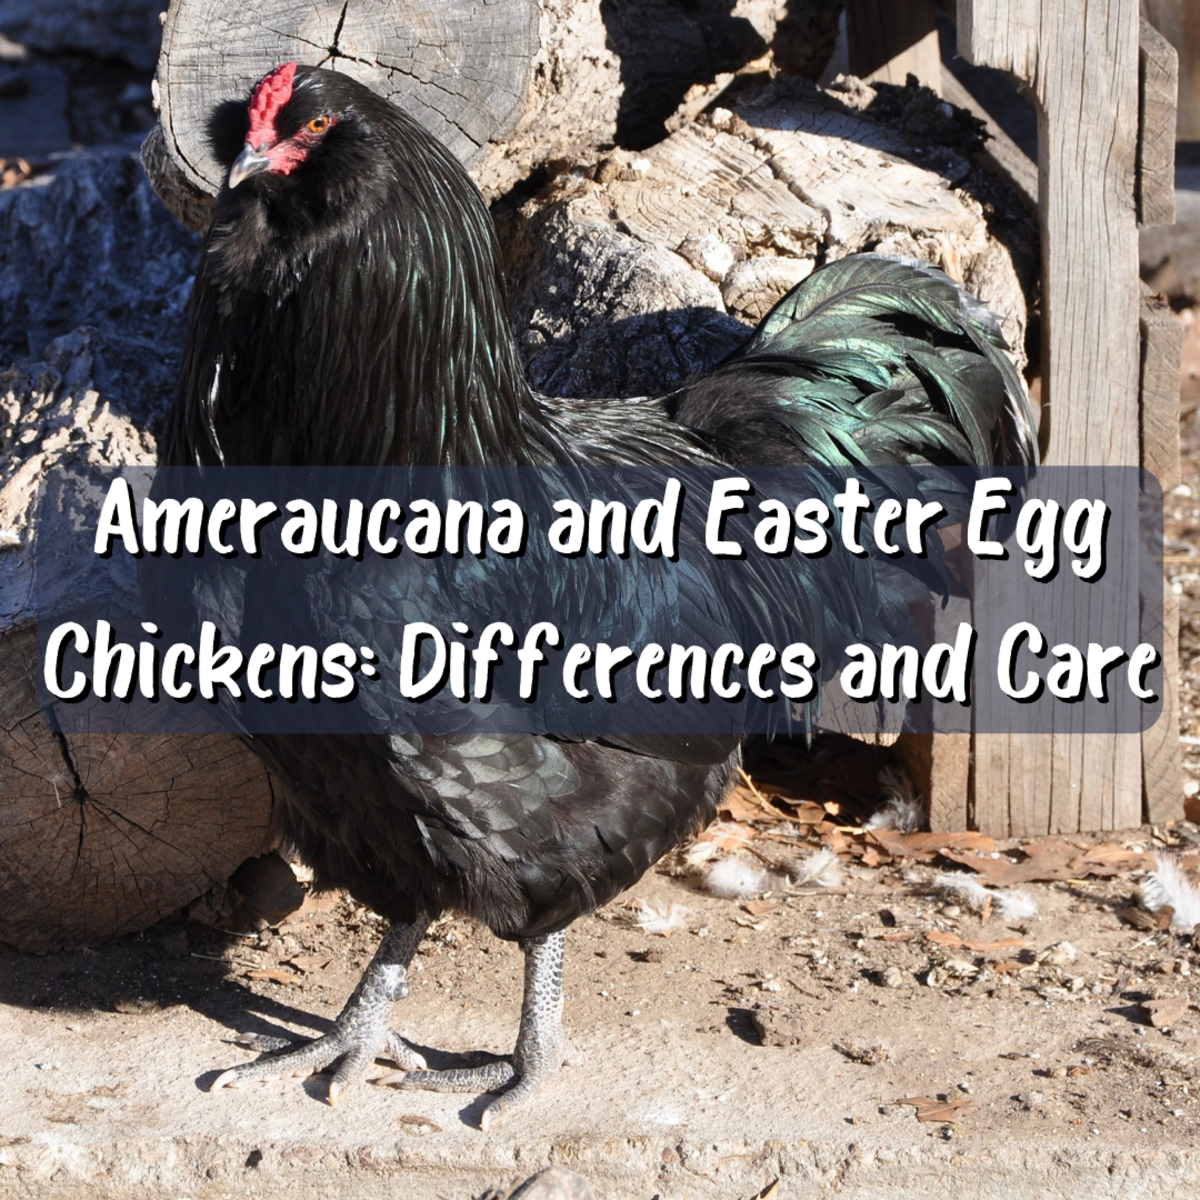 Read Ameraucana or Americana Chickens and how they differ from Easter Egg chickens. Also, learn about Ameraucana care. Pictured above is a Black Ameraucana rooster.